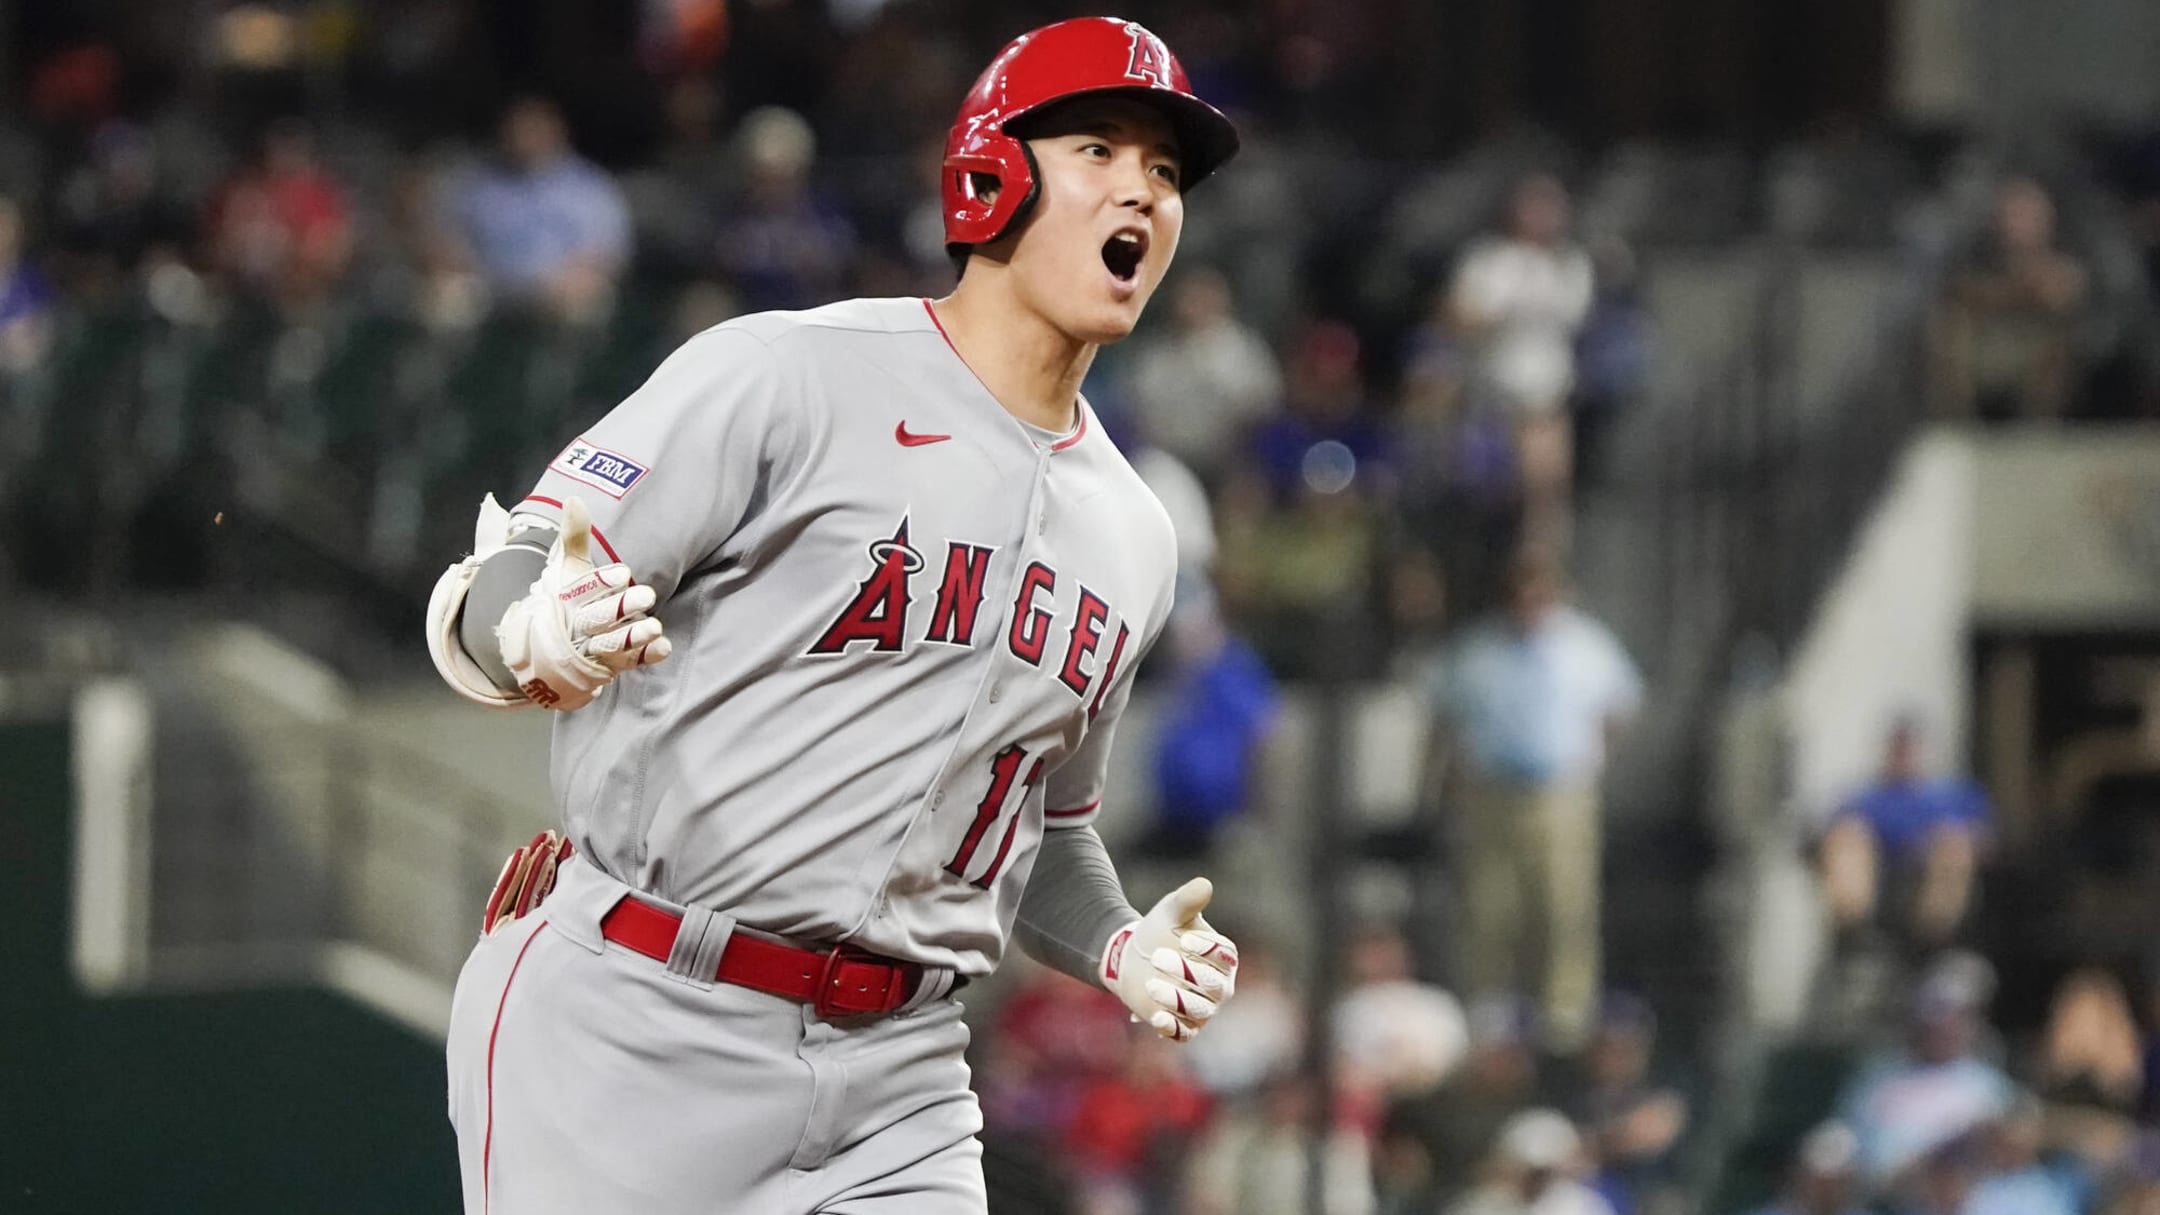 Shohei Ohtani dazzles on Broadway with two more home runs